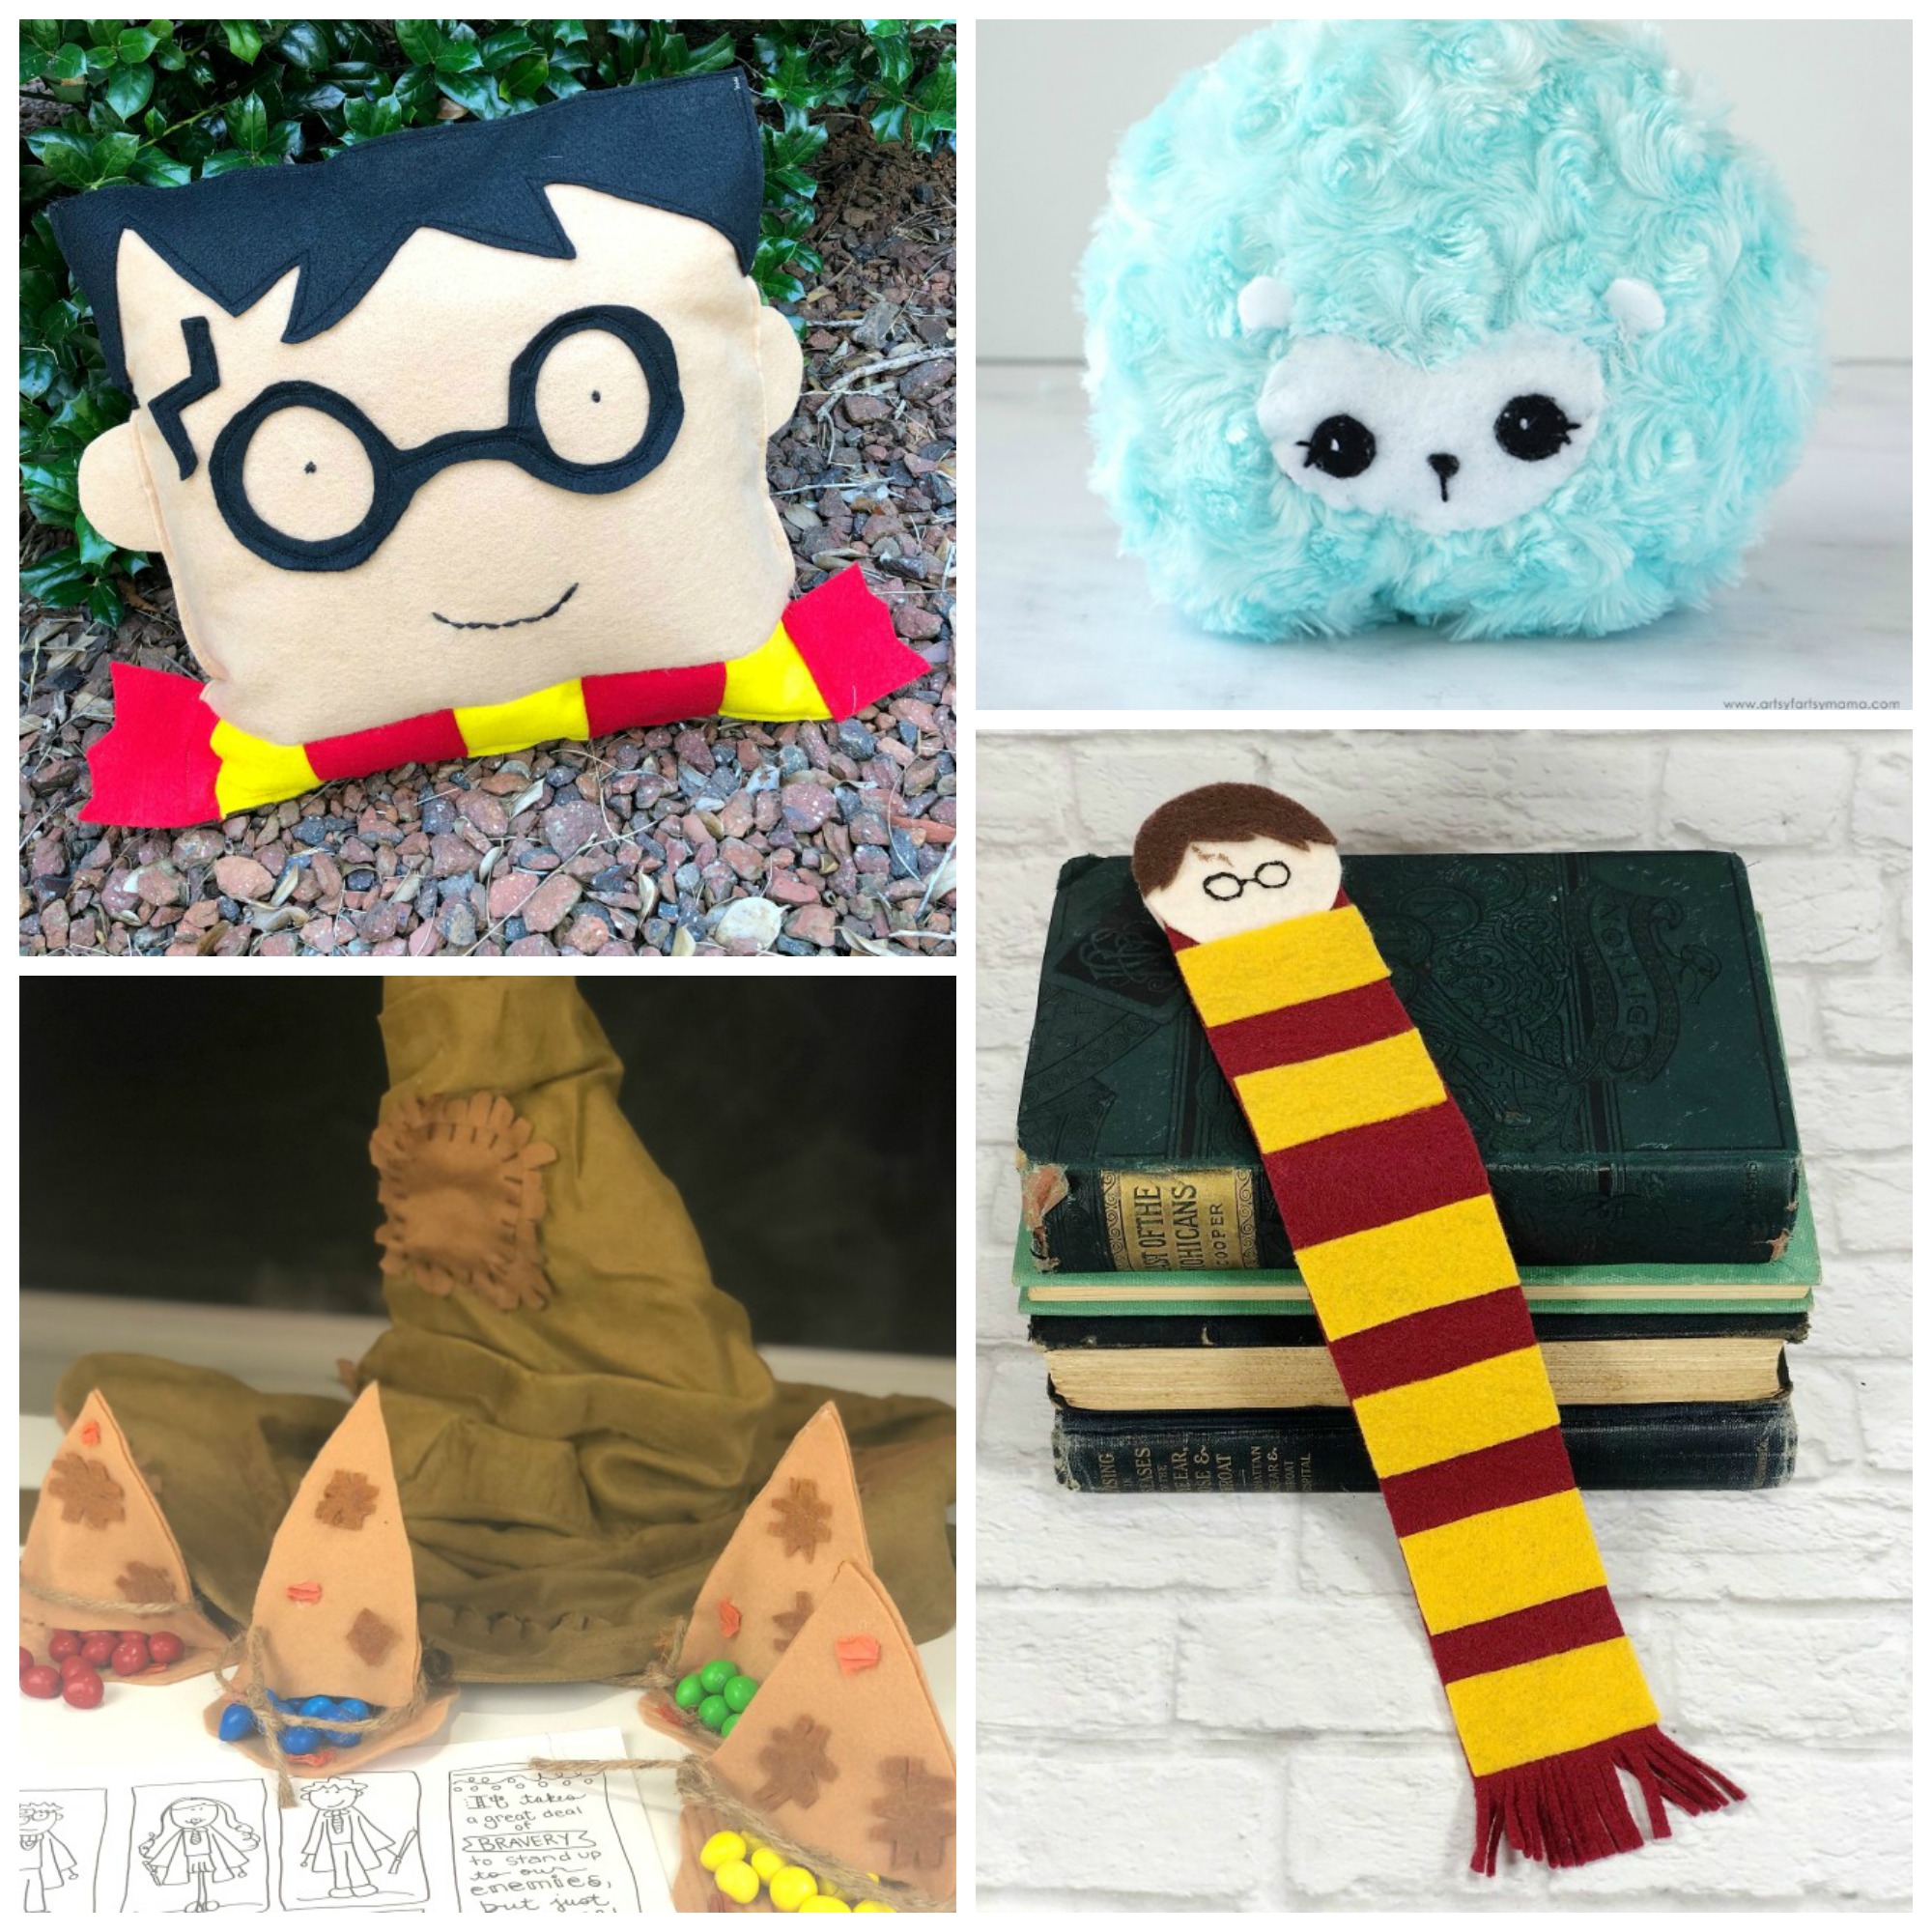 Harry Potter™ Party Supplies